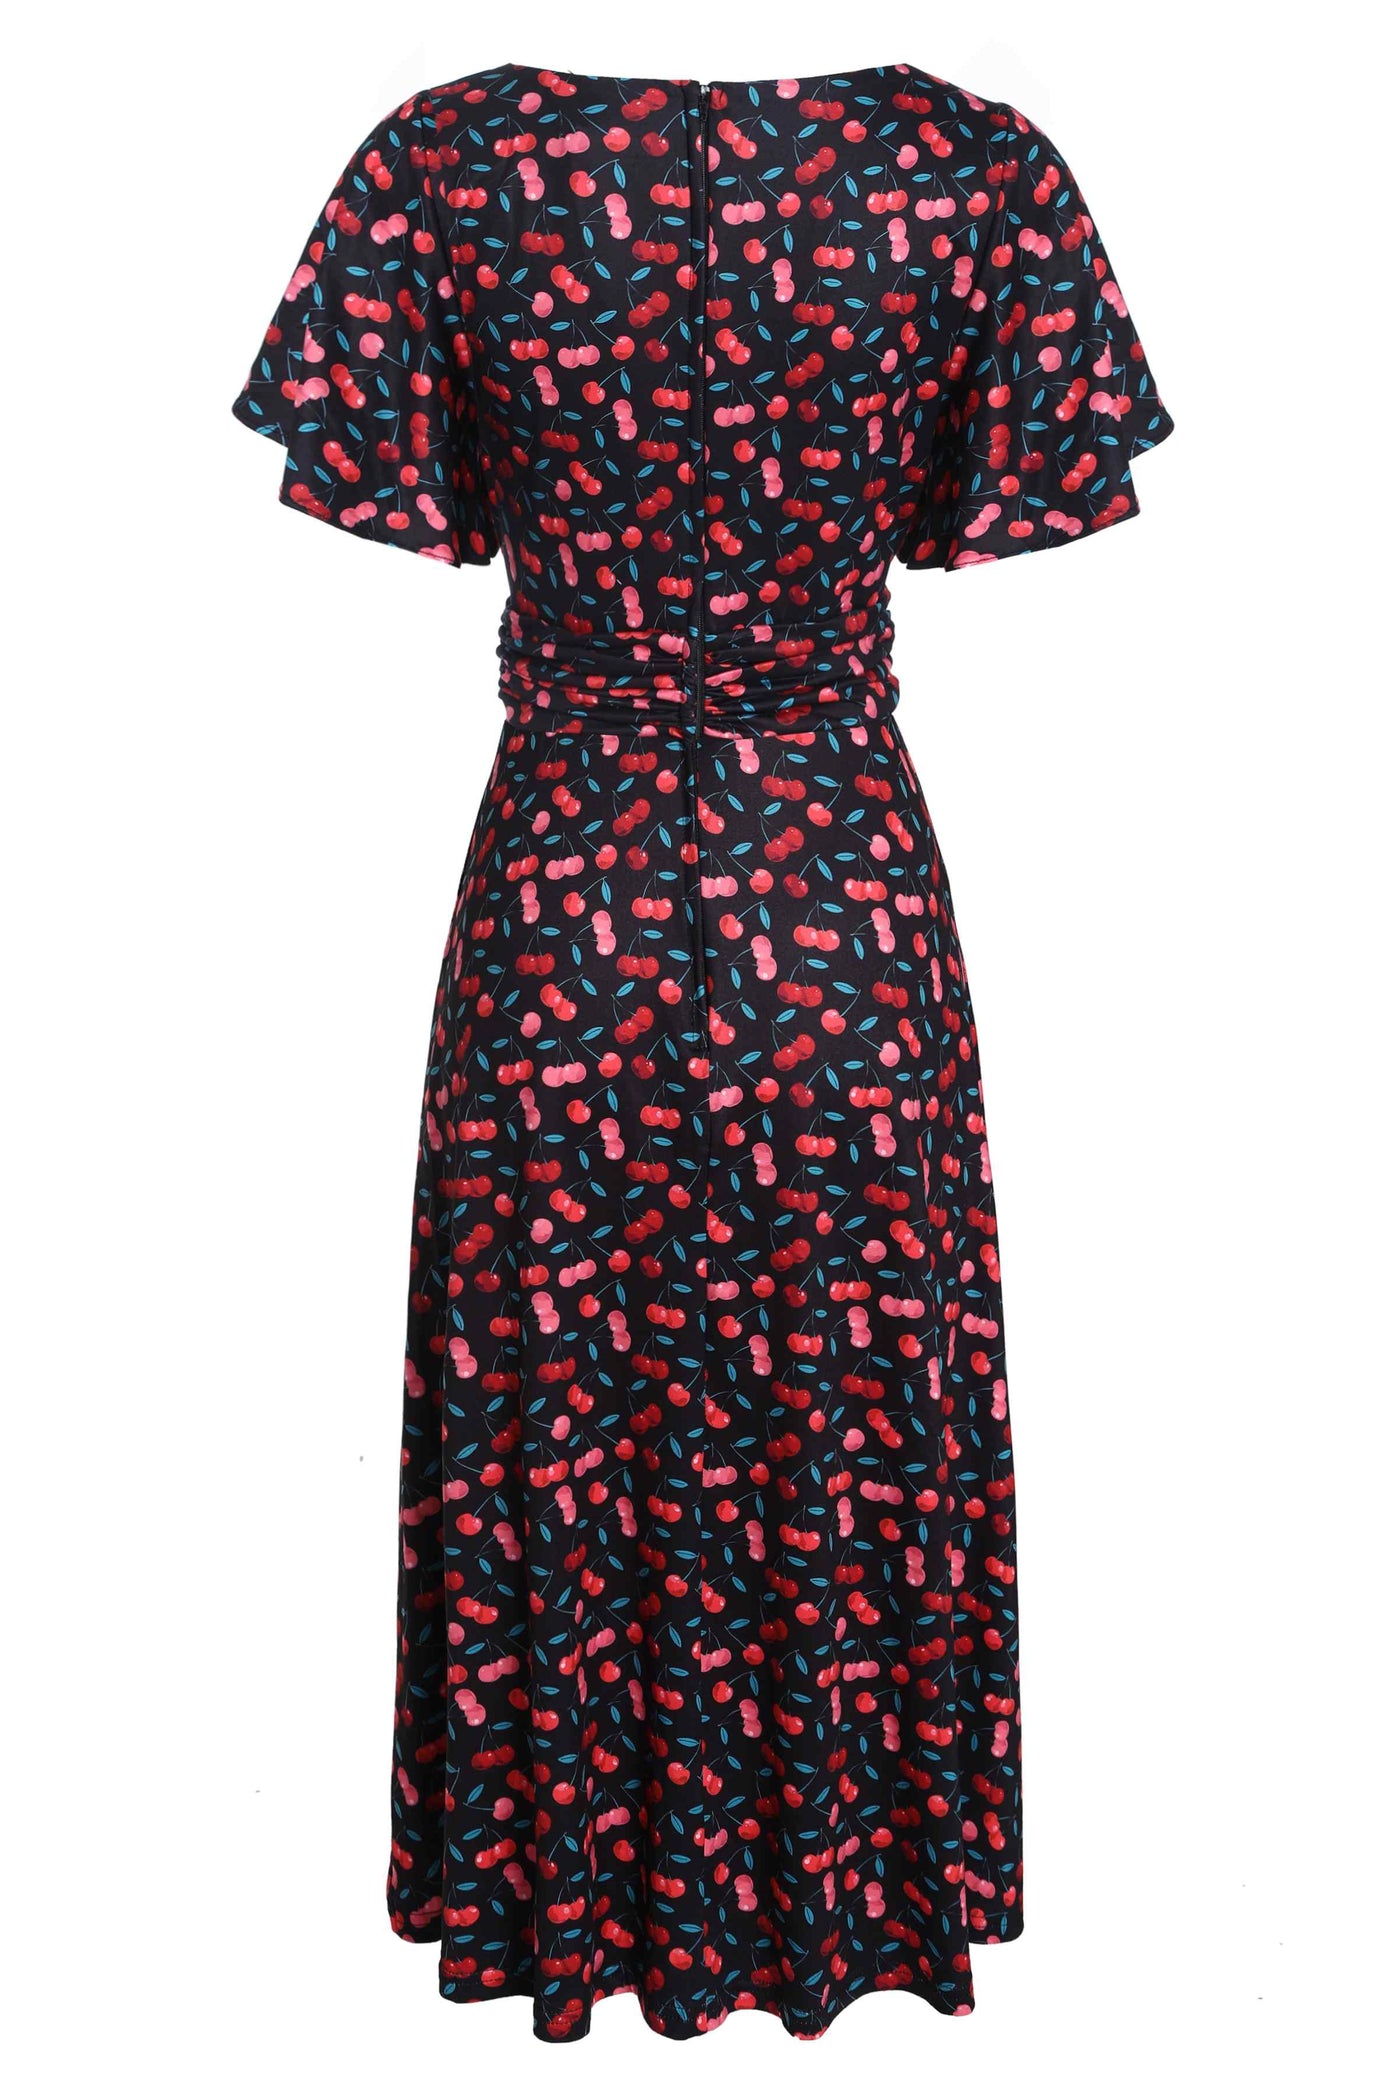 Back View of Retro Cherry Print Crossover Bust Dress in Black